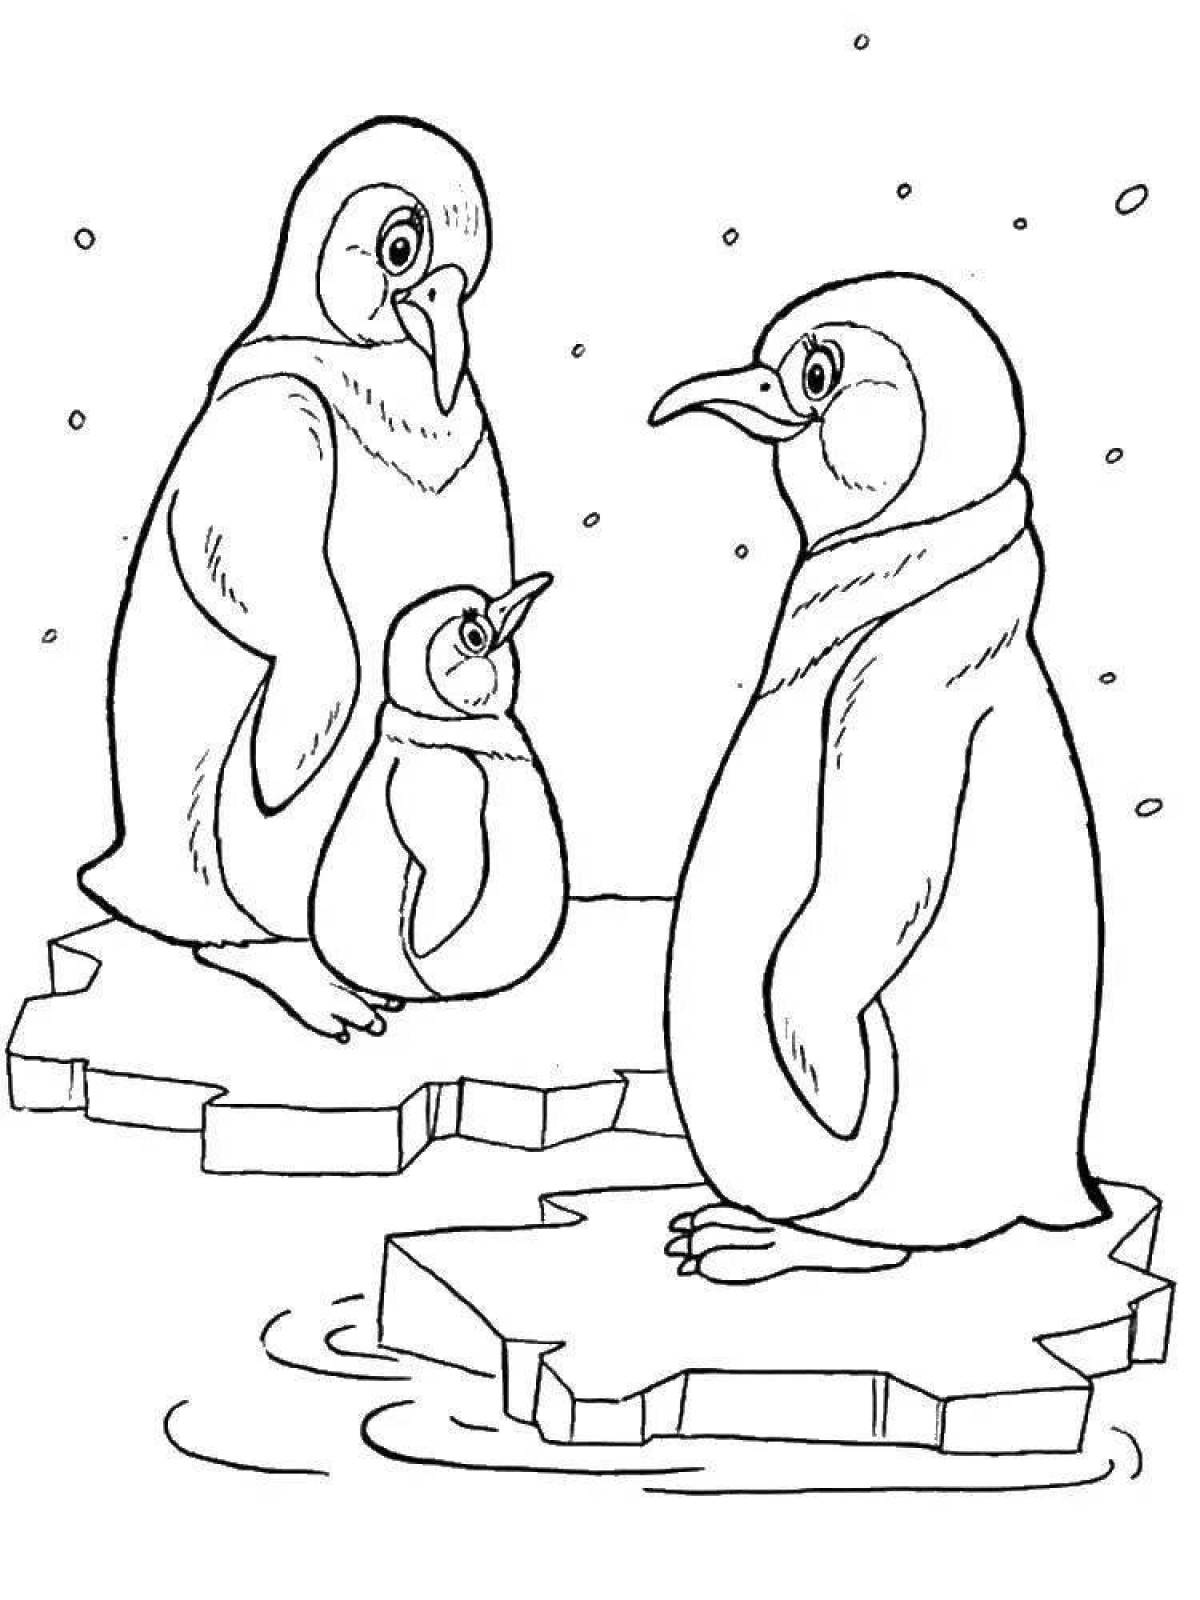 Coloring page bright penguin on ice